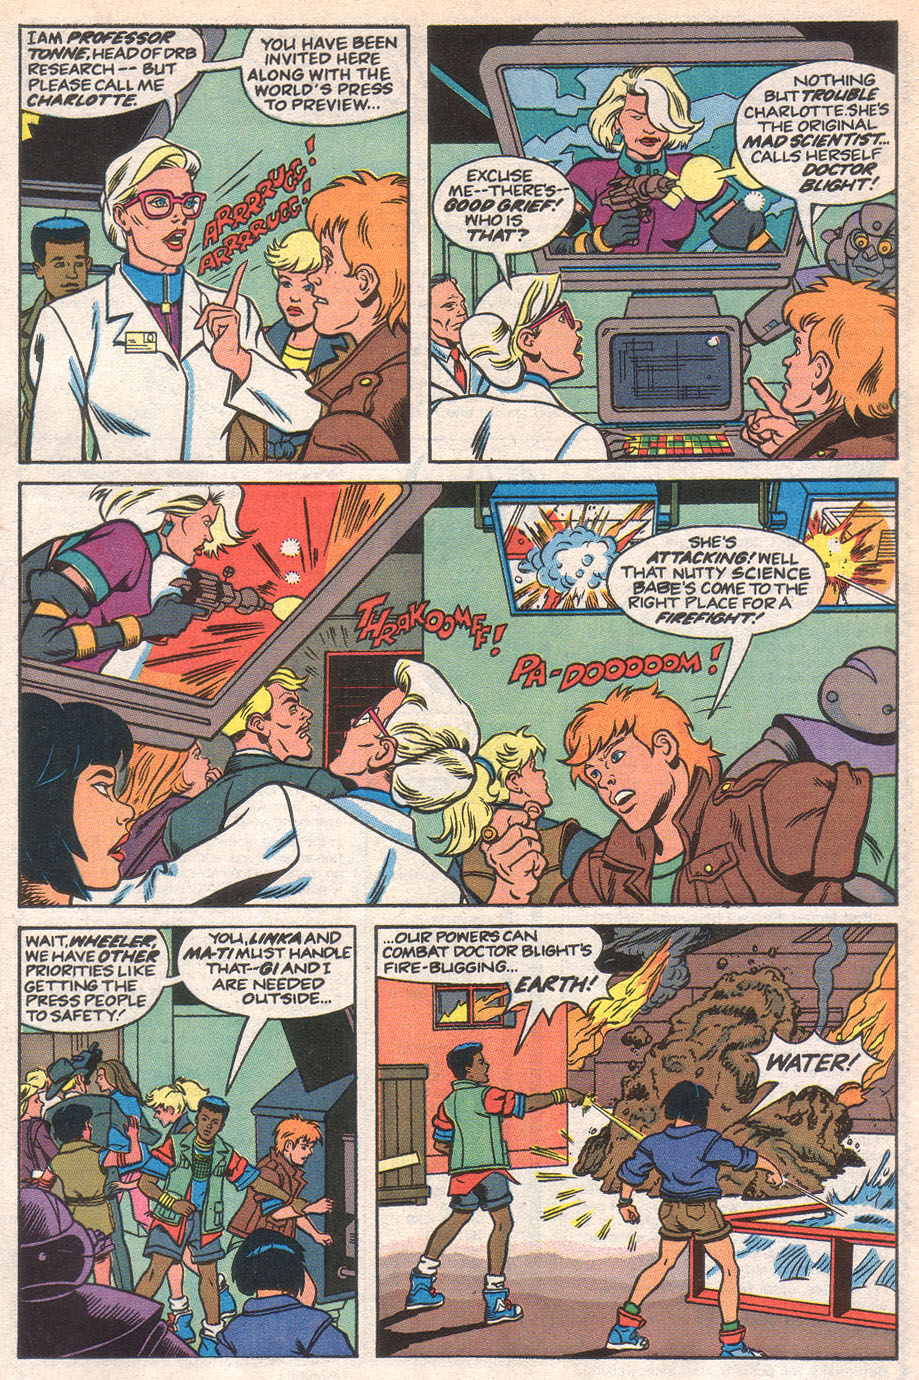 Captain Planet and the Planeteers 8 Page 22